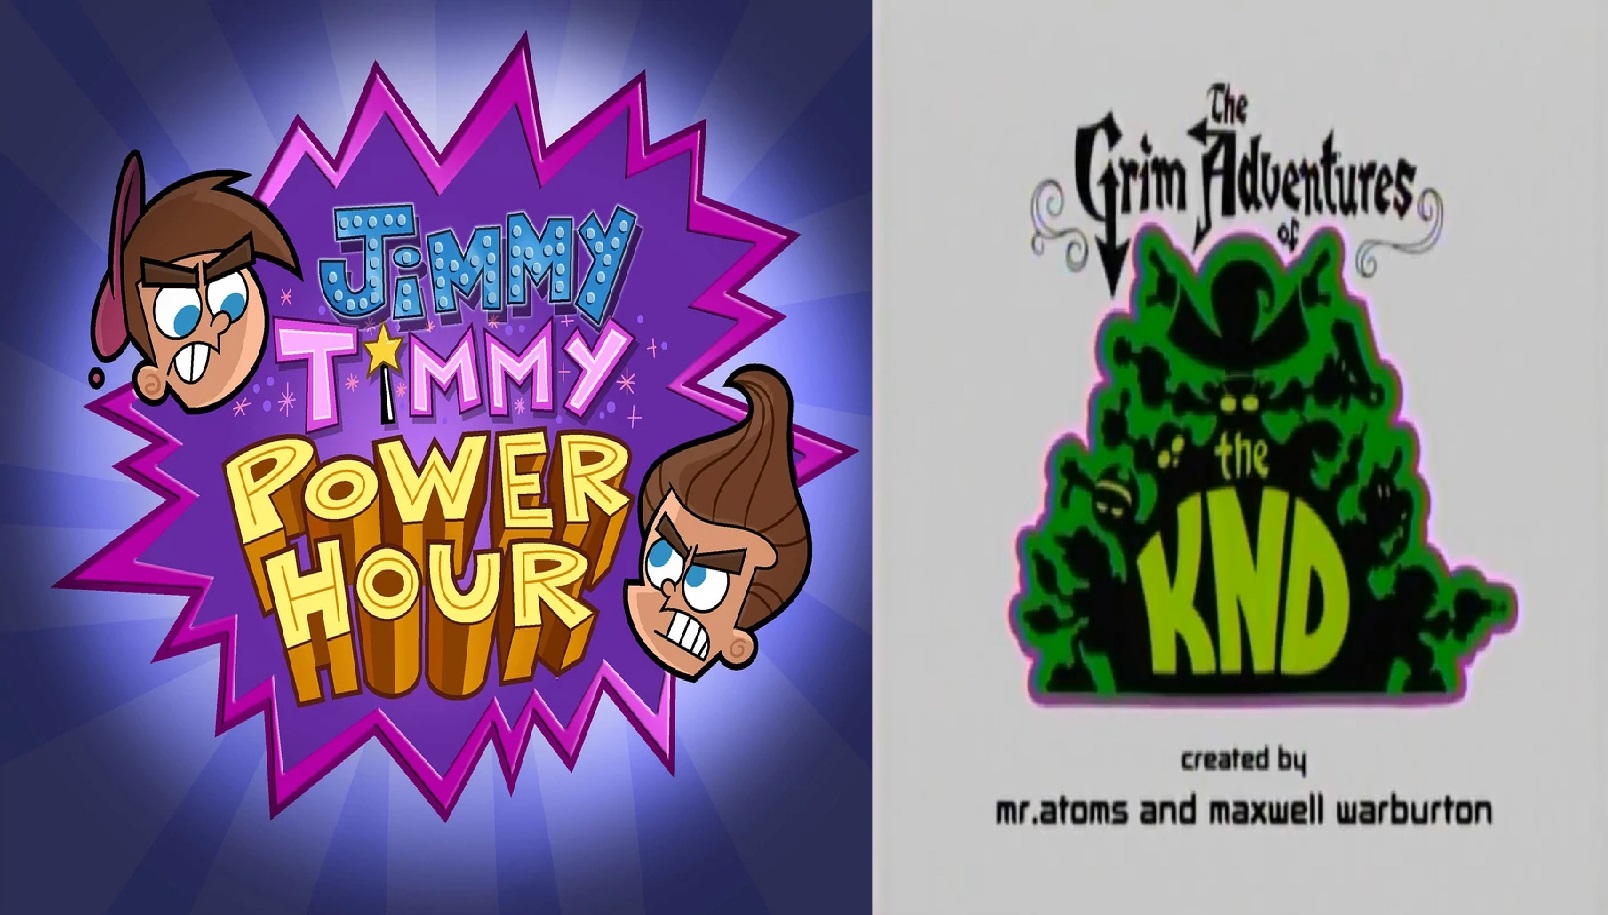 Mandy (The Grim Adventures of Billy and Mandy), Wiki Villains Versos  Galeria